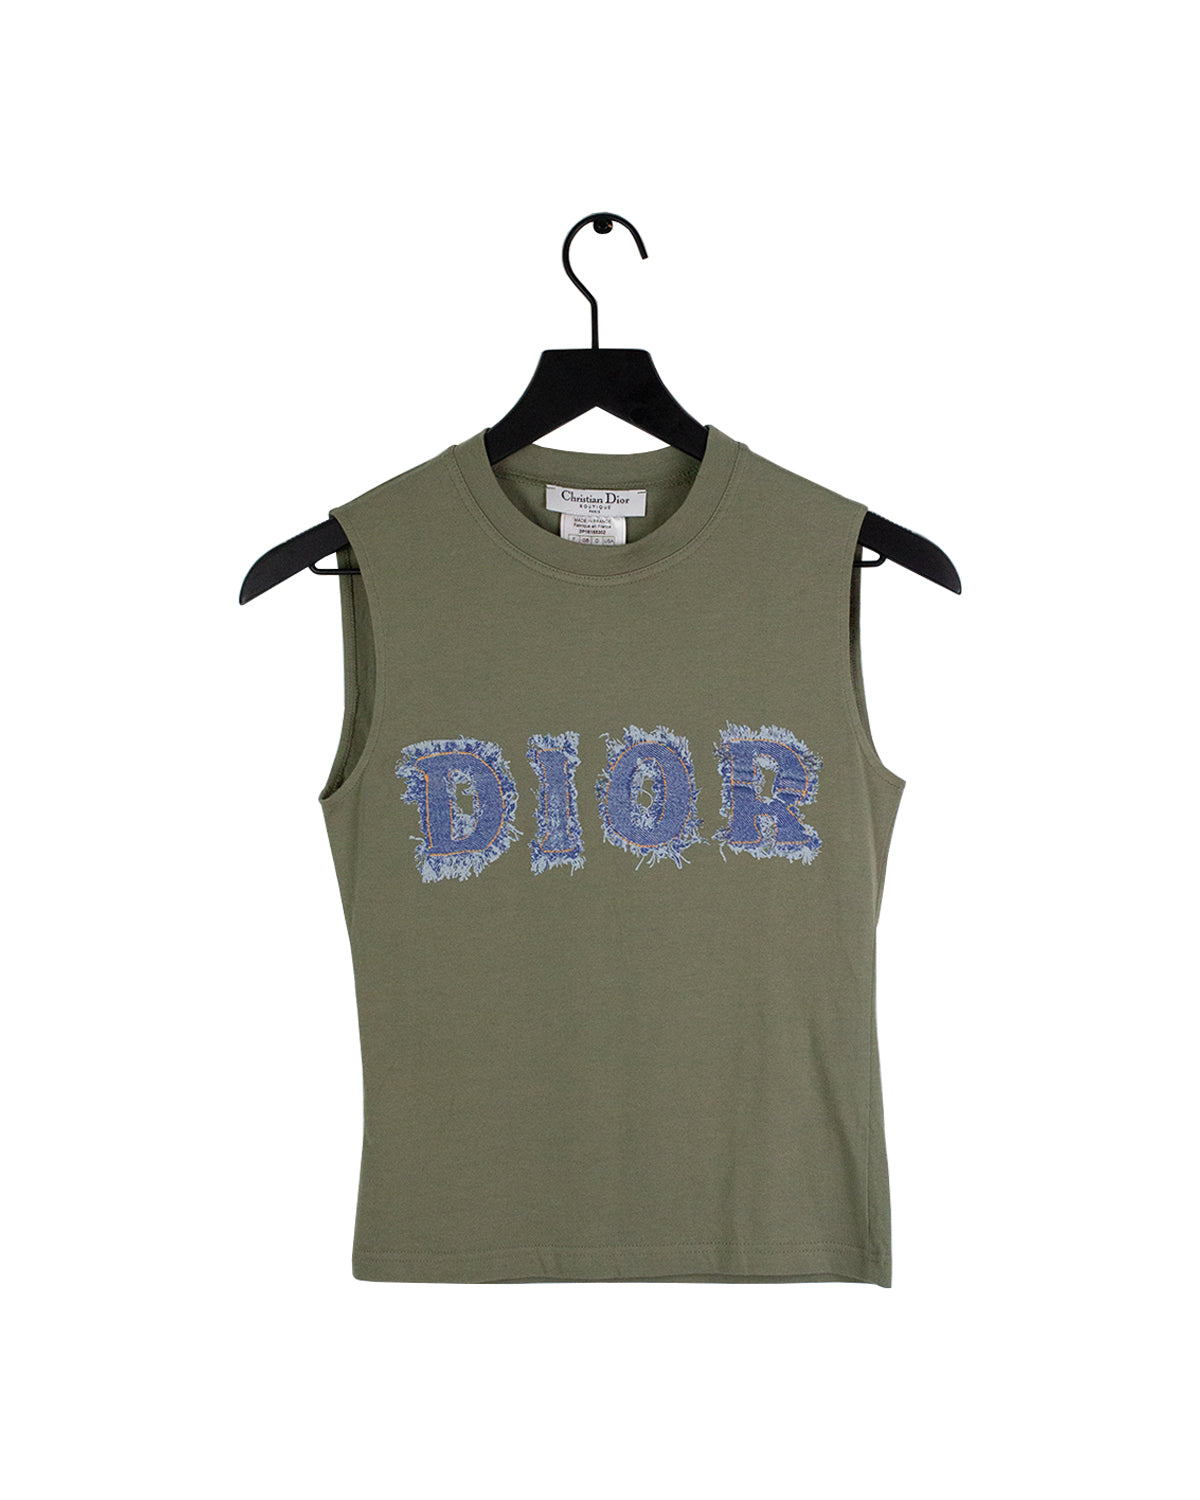 Vintage Christian Dior Olive Tank Top Coachella Outfit Inspo